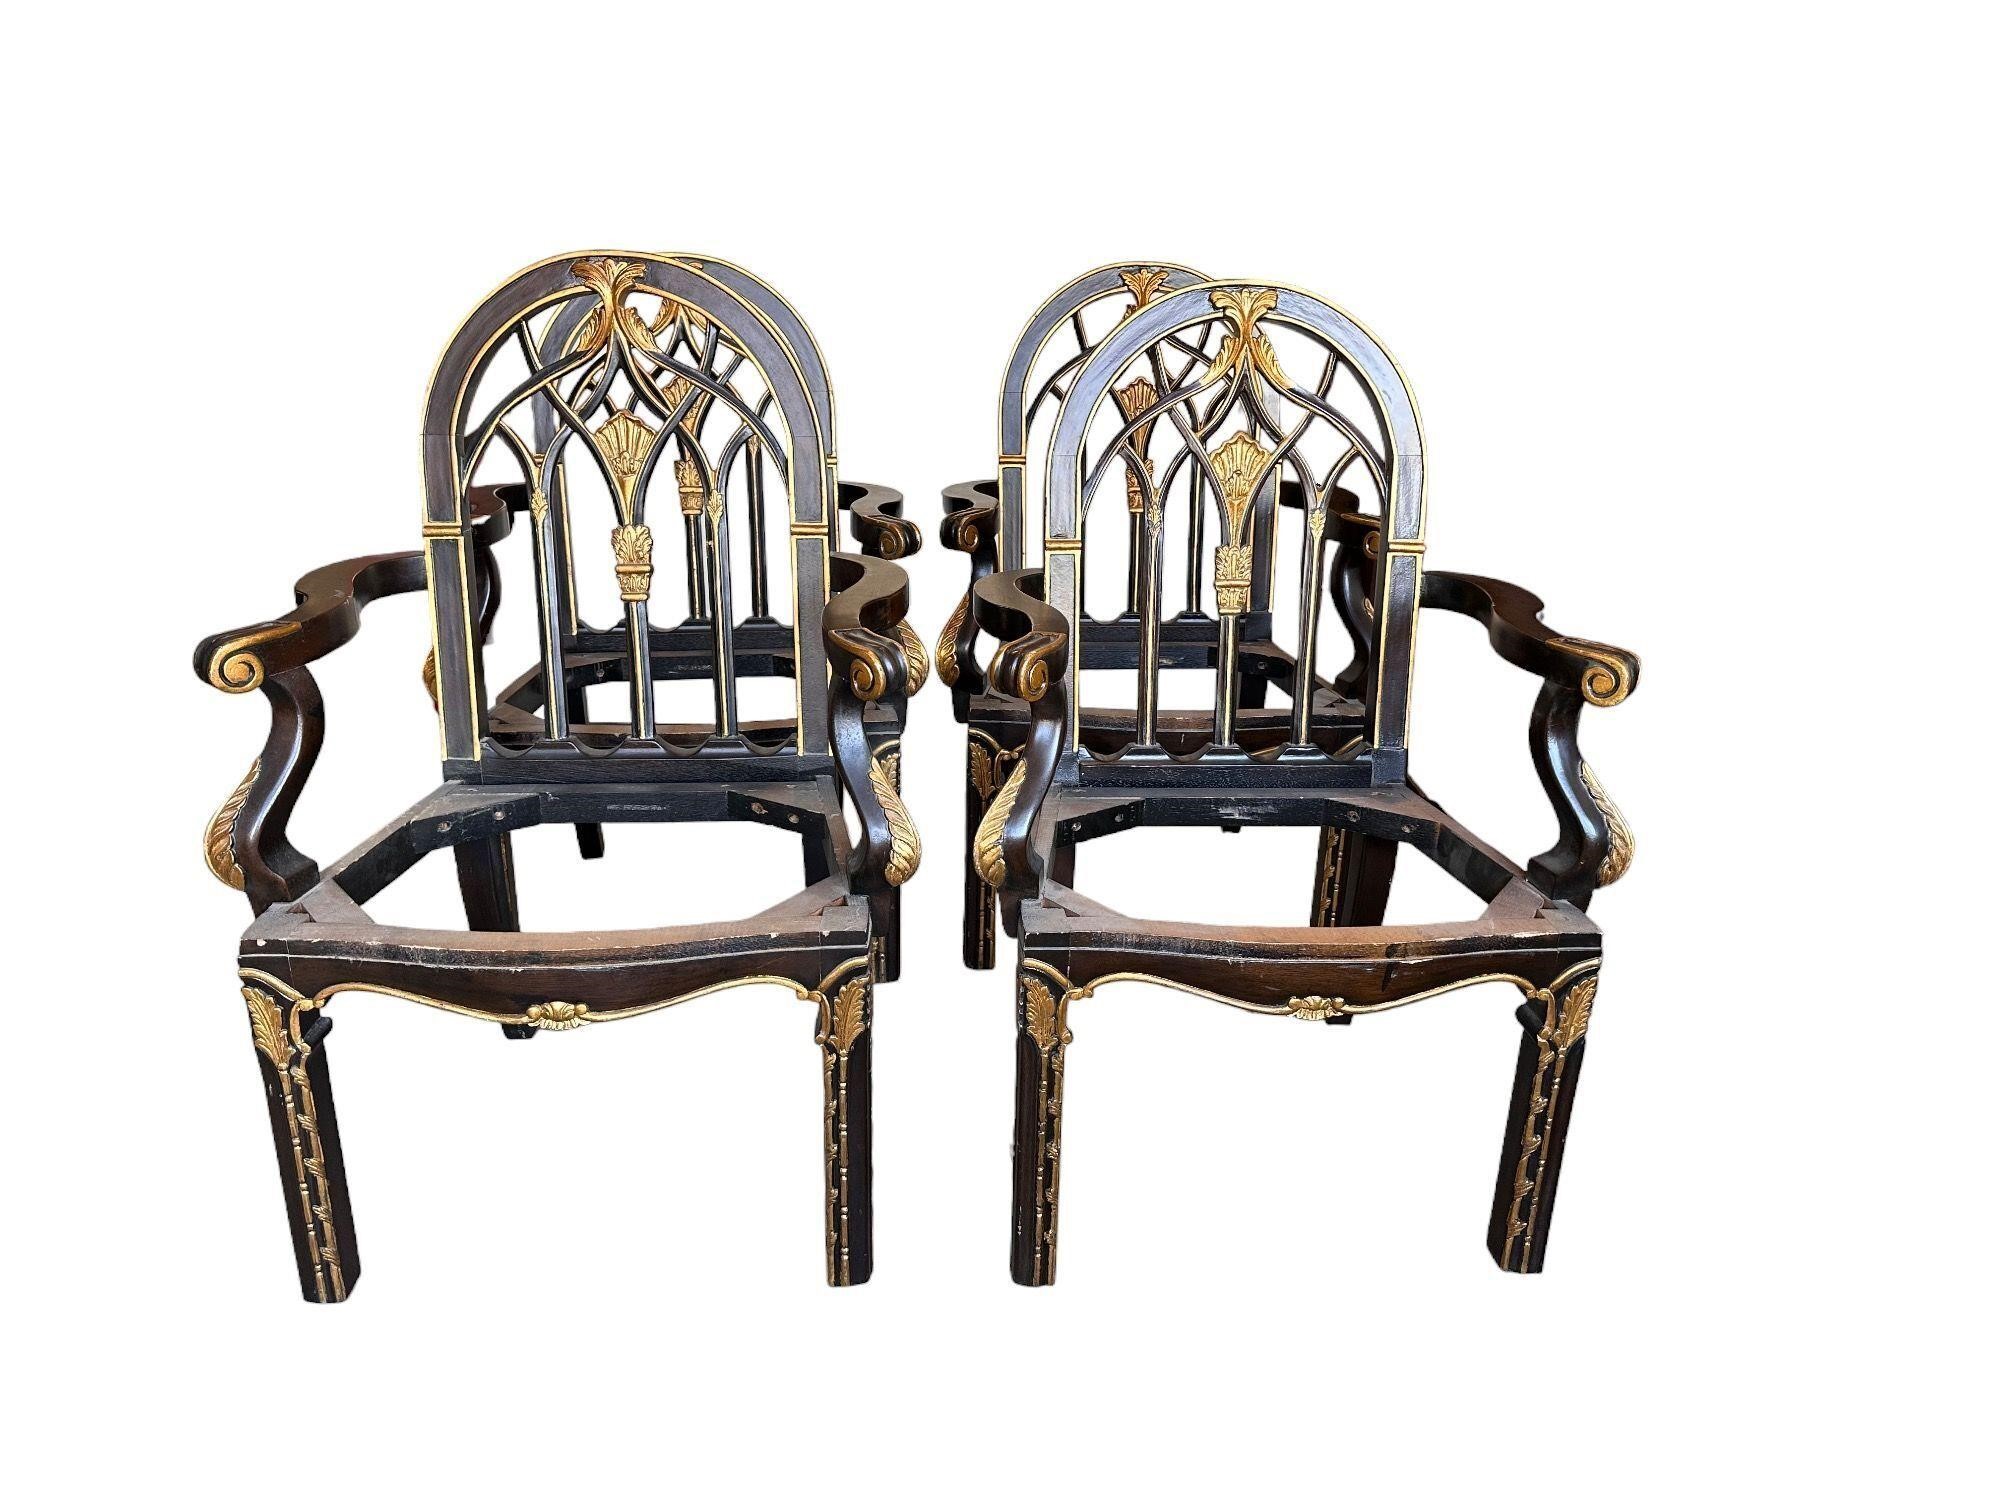 Ornate French Dinning Room Chairs